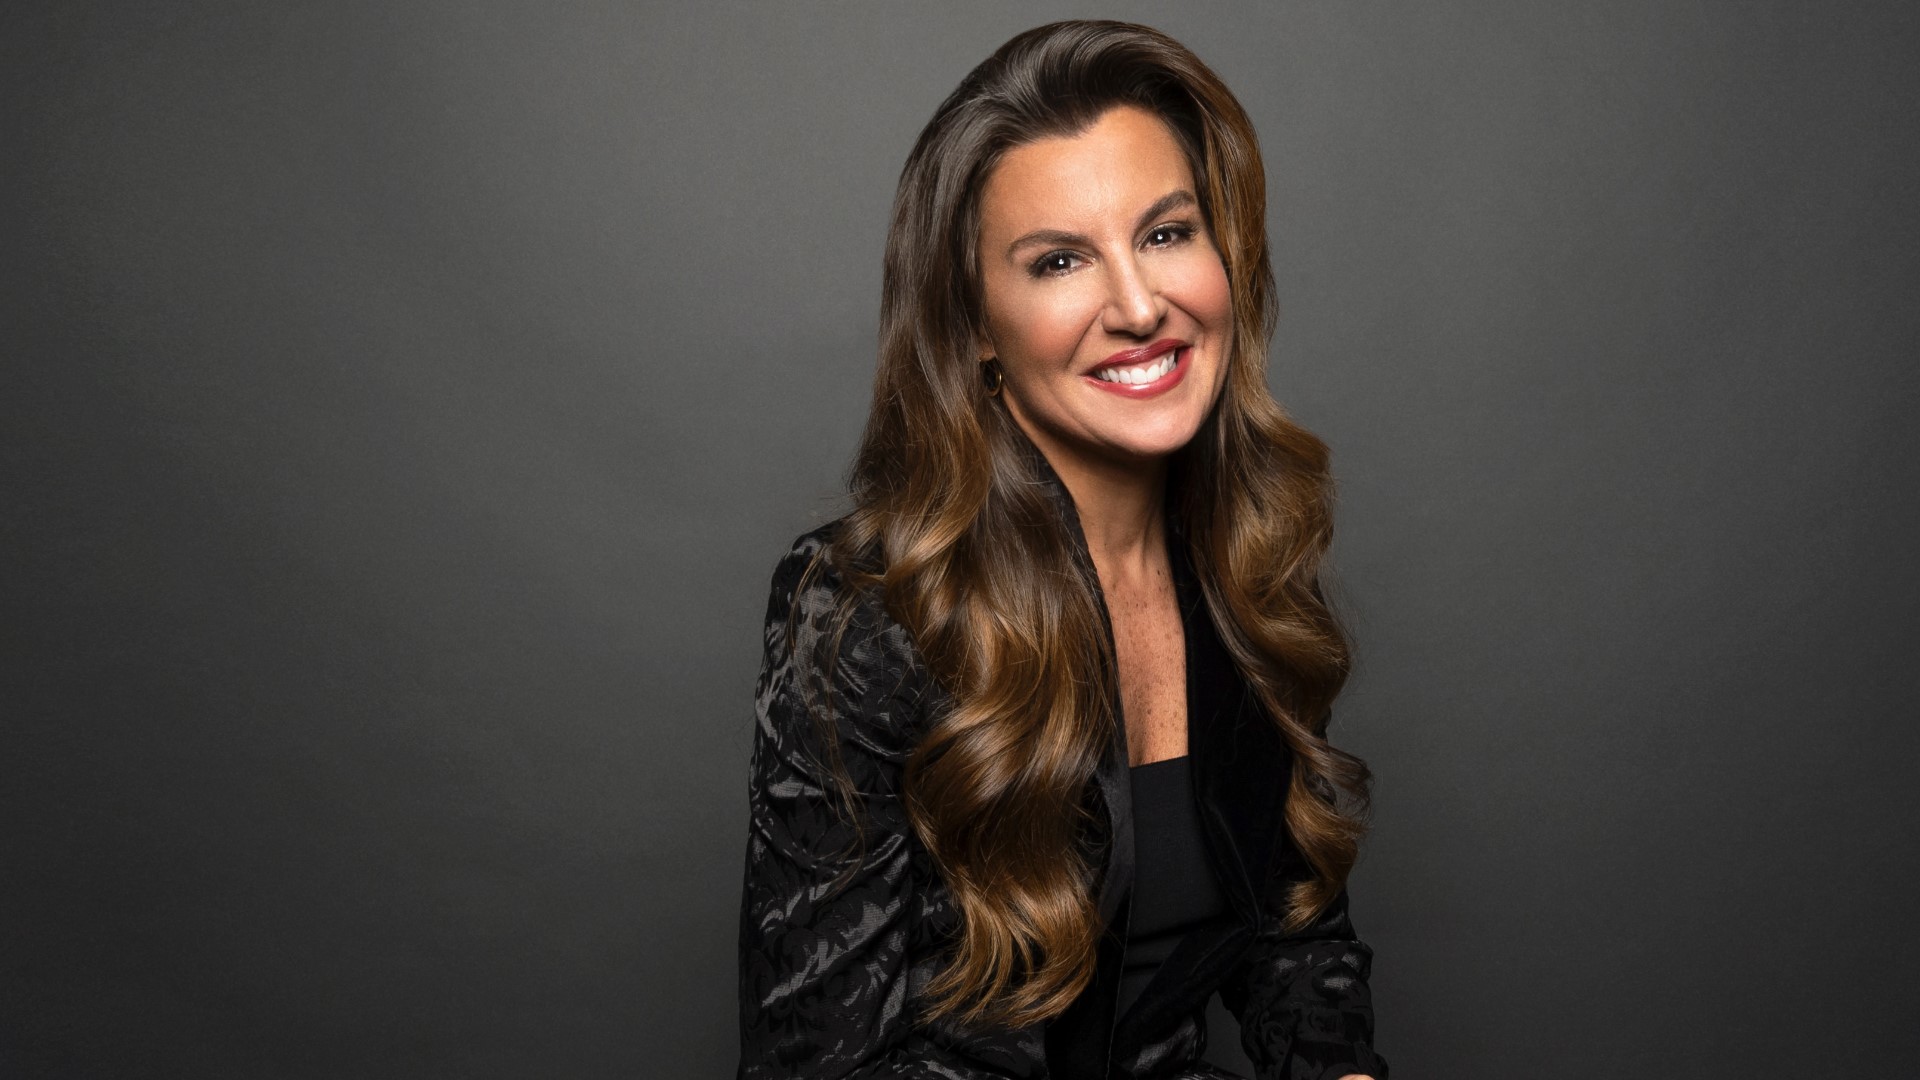 C-Suite Executive & Author Rhonda Vetere discusses how to face challenges and find success in 2023 in her new book 'Grit and Grind.'